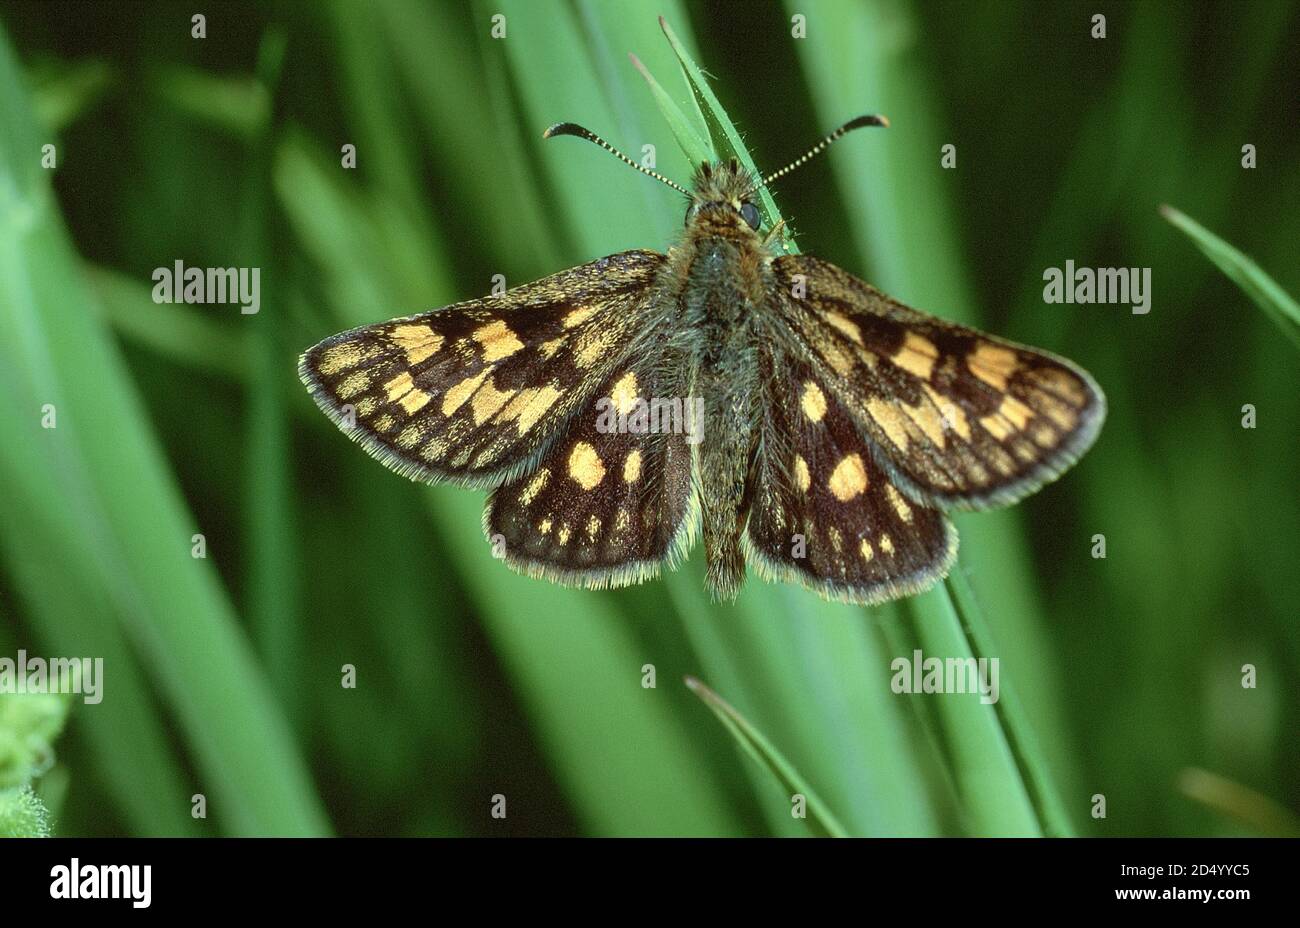 Chequered Skipper, Arctic Skipper (Carterocephalus palaemon, Pamphila palaemon), sitting at a spear, dorsal view, Germany Stock Photo